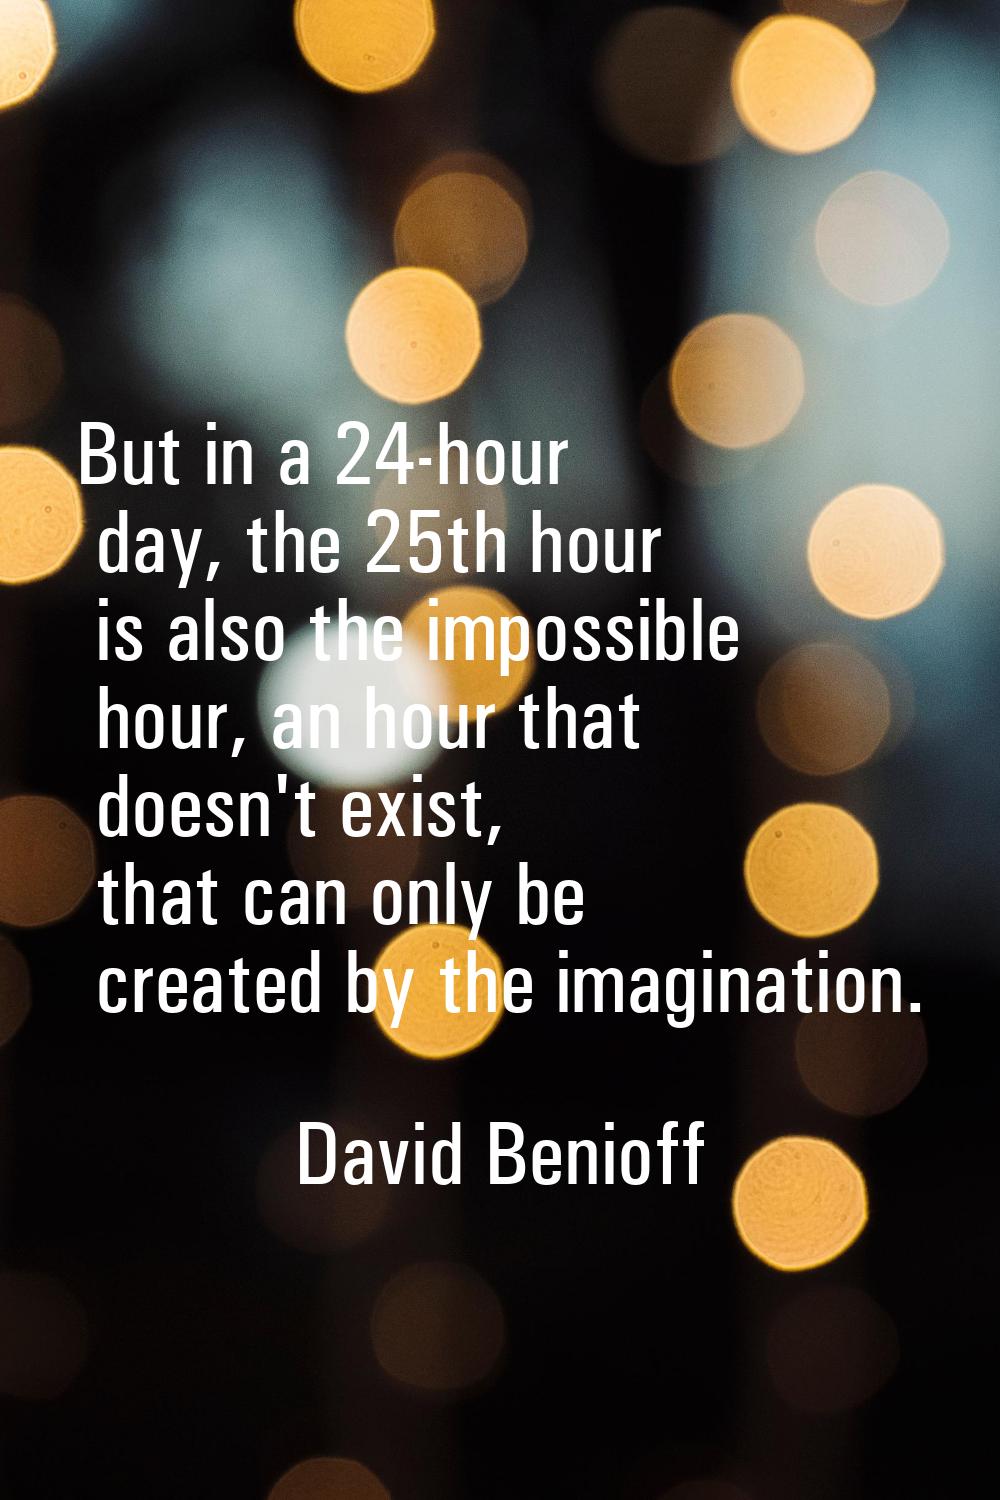 But in a 24-hour day, the 25th hour is also the impossible hour, an hour that doesn't exist, that c